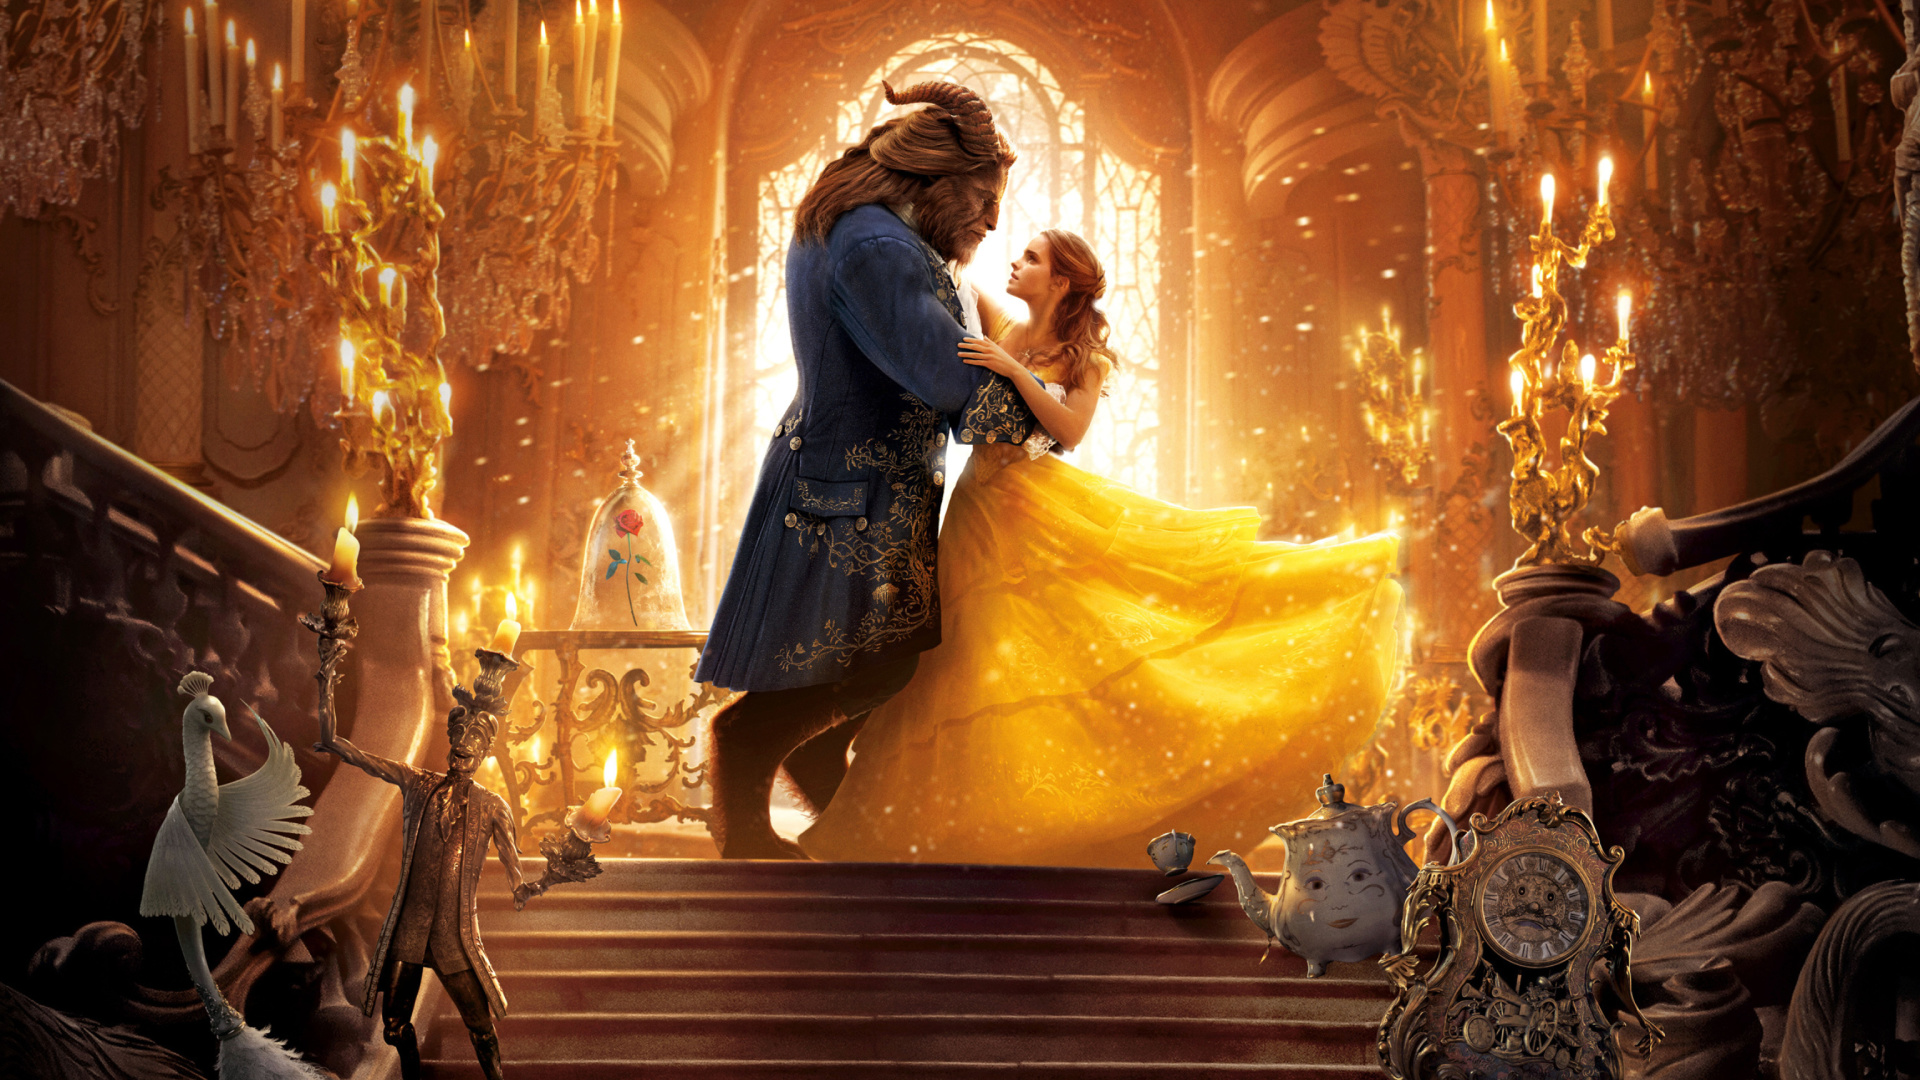 Beauty and the Beast HD wallpaper 1920x1080